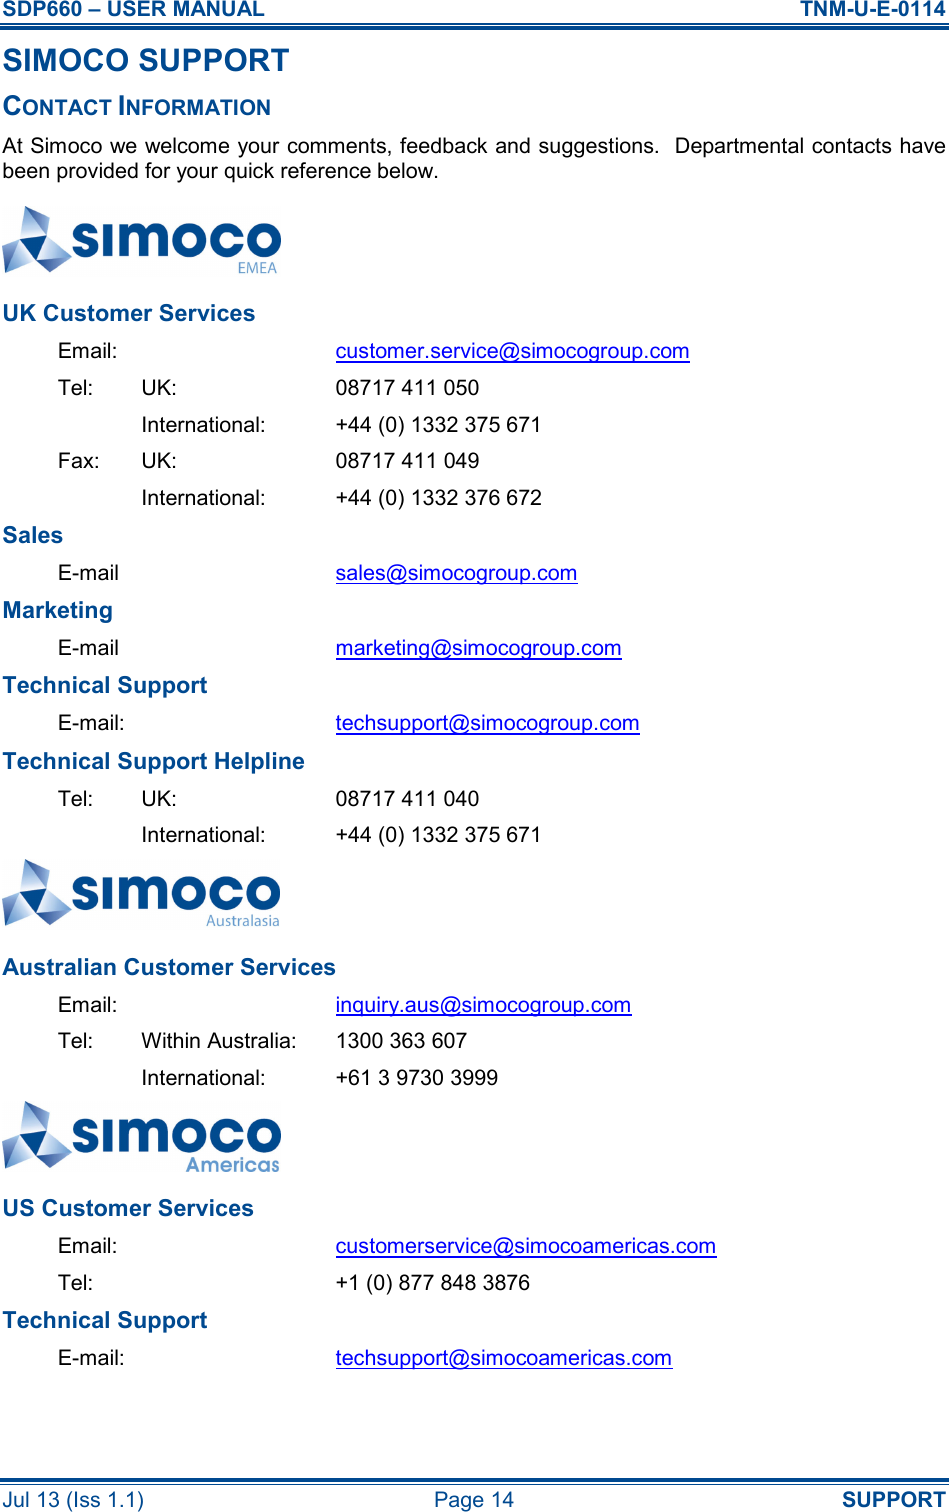 SDP660 – USER MANUAL  TNM-U-E-0114 Jul 13 (Iss 1.1)  Page 14  SUPPORT SIMOCO SUPPORT CONTACT INFORMATION At Simoco we welcome your comments, feedback and suggestions.  Departmental contacts have been provided for your quick reference below.  UK Customer Services Email:  customer.service@simocogroup.com Tel:  UK:  08717 411 050   International:  +44 (0) 1332 375 671 Fax:  UK:  08717 411 049   International:  +44 (0) 1332 376 672 Sales E-mail  sales@simocogroup.com Marketing E-mail  marketing@simocogroup.com Technical Support E-mail:  techsupport@simocogroup.com Technical Support Helpline Tel:  UK:  08717 411 040   International:  +44 (0) 1332 375 671  Australian Customer Services Email:  inquiry.aus@simocogroup.com Tel:  Within Australia:  1300 363 607   International:  +61 3 9730 3999  US Customer Services Email:  customerservice@simocoamericas.com Tel:    +1 (0) 877 848 3876 Technical Support E-mail:  techsupport@simocoamericas.com  